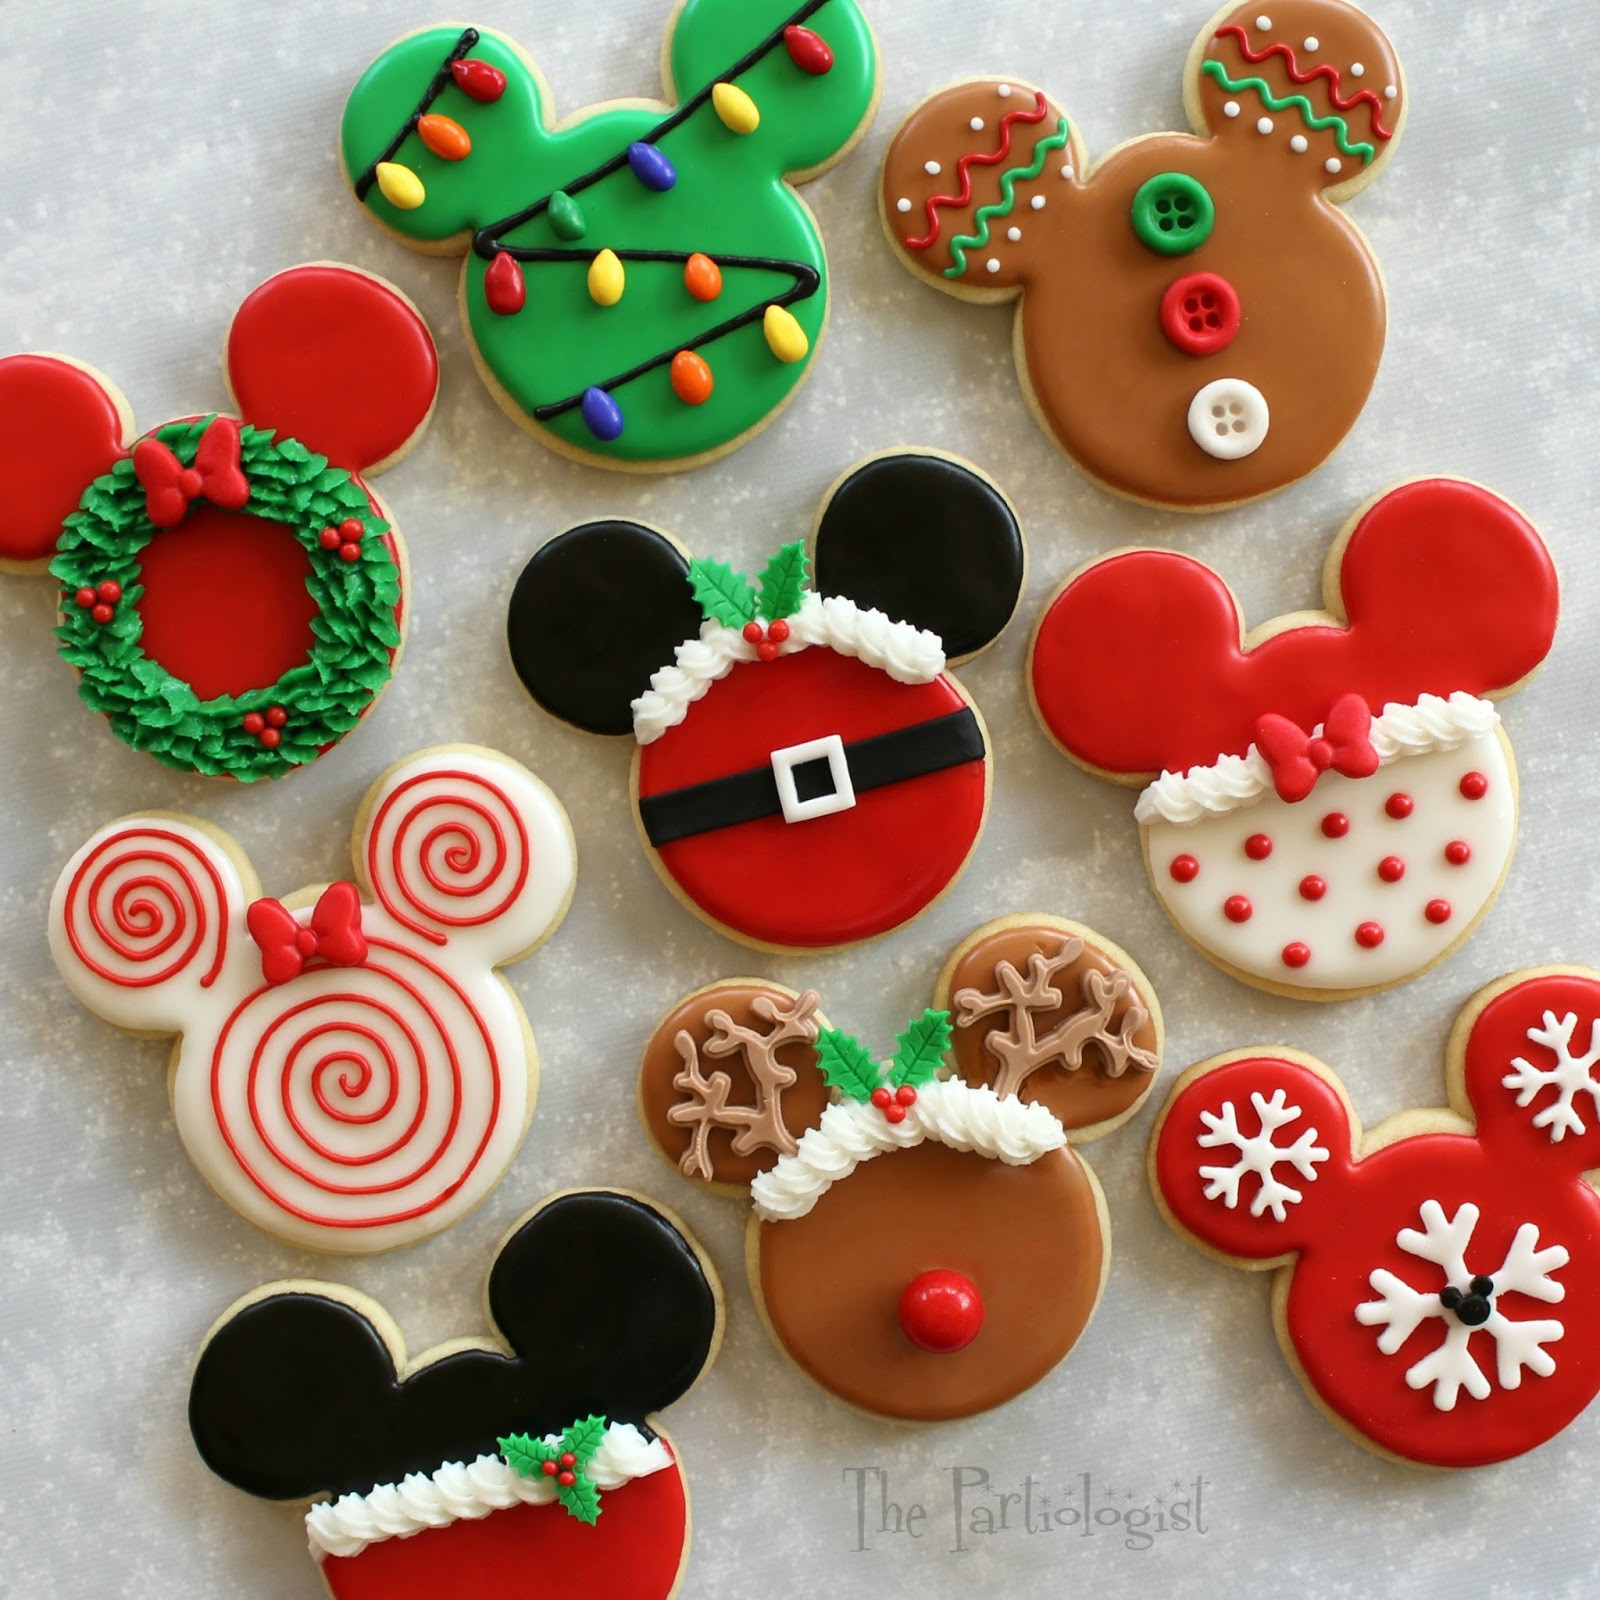 Making Christmas Cookies
 The Partiologist Disney Themed Christmas Cookies